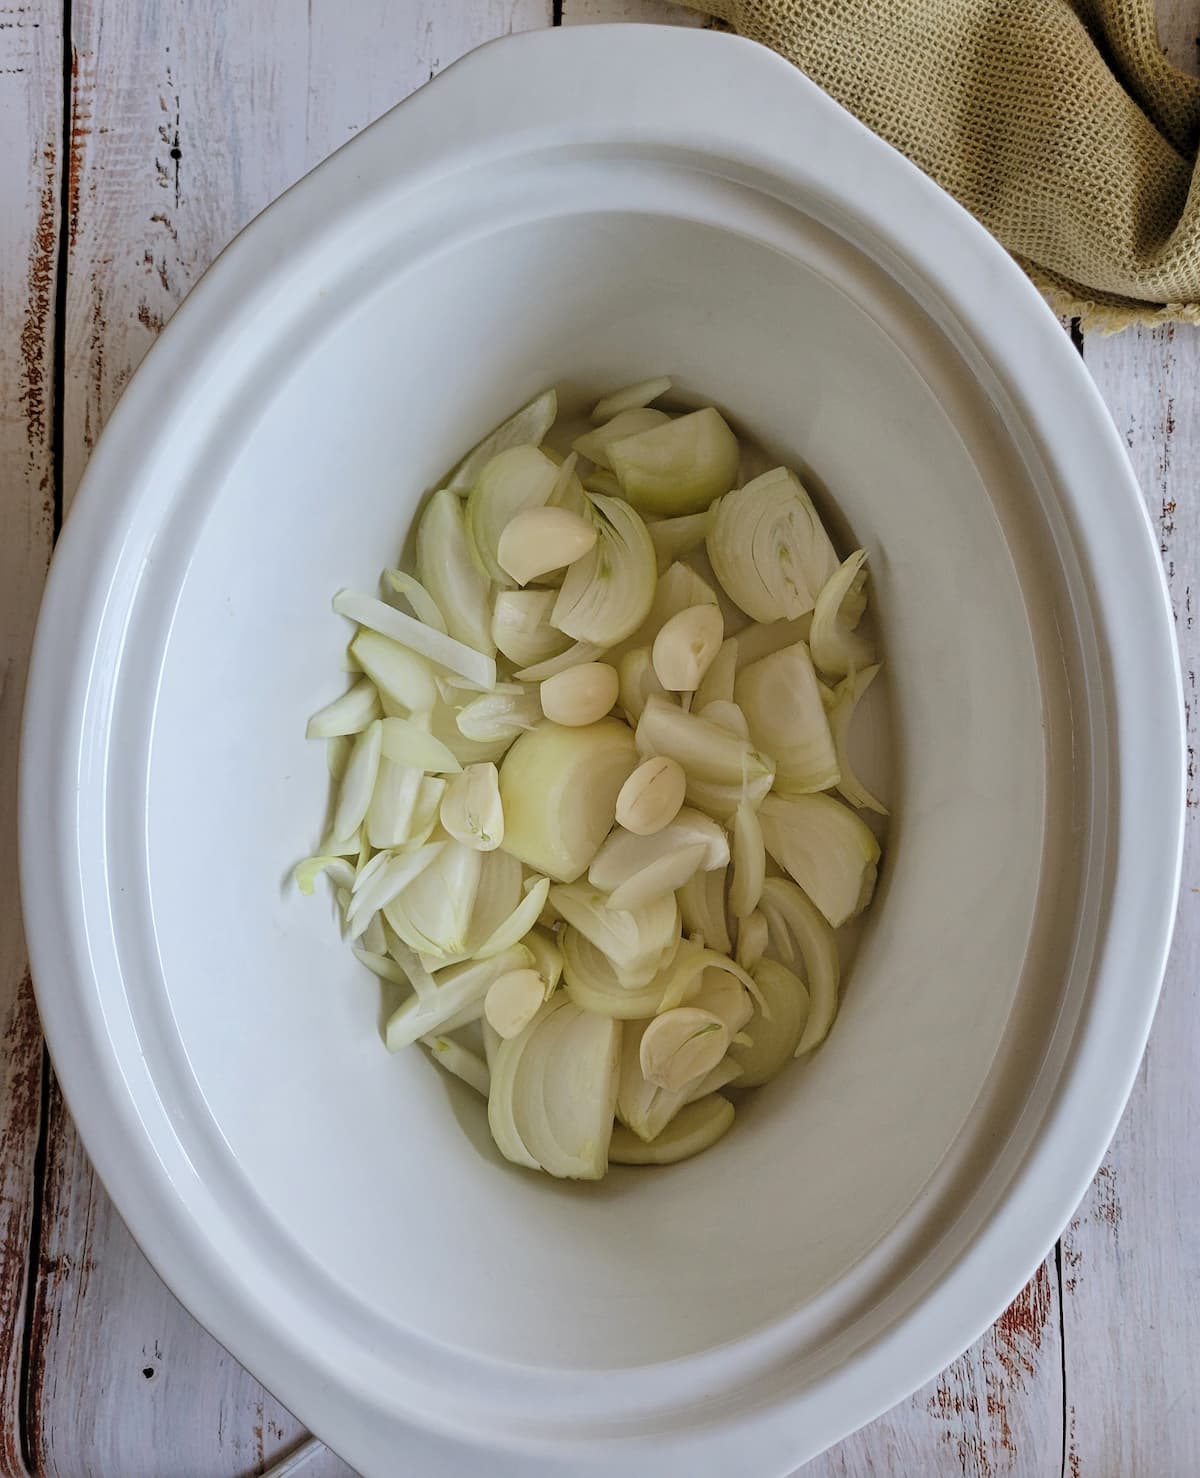 raw sliced white onions and whole peeled garlic cloves in a crockpot